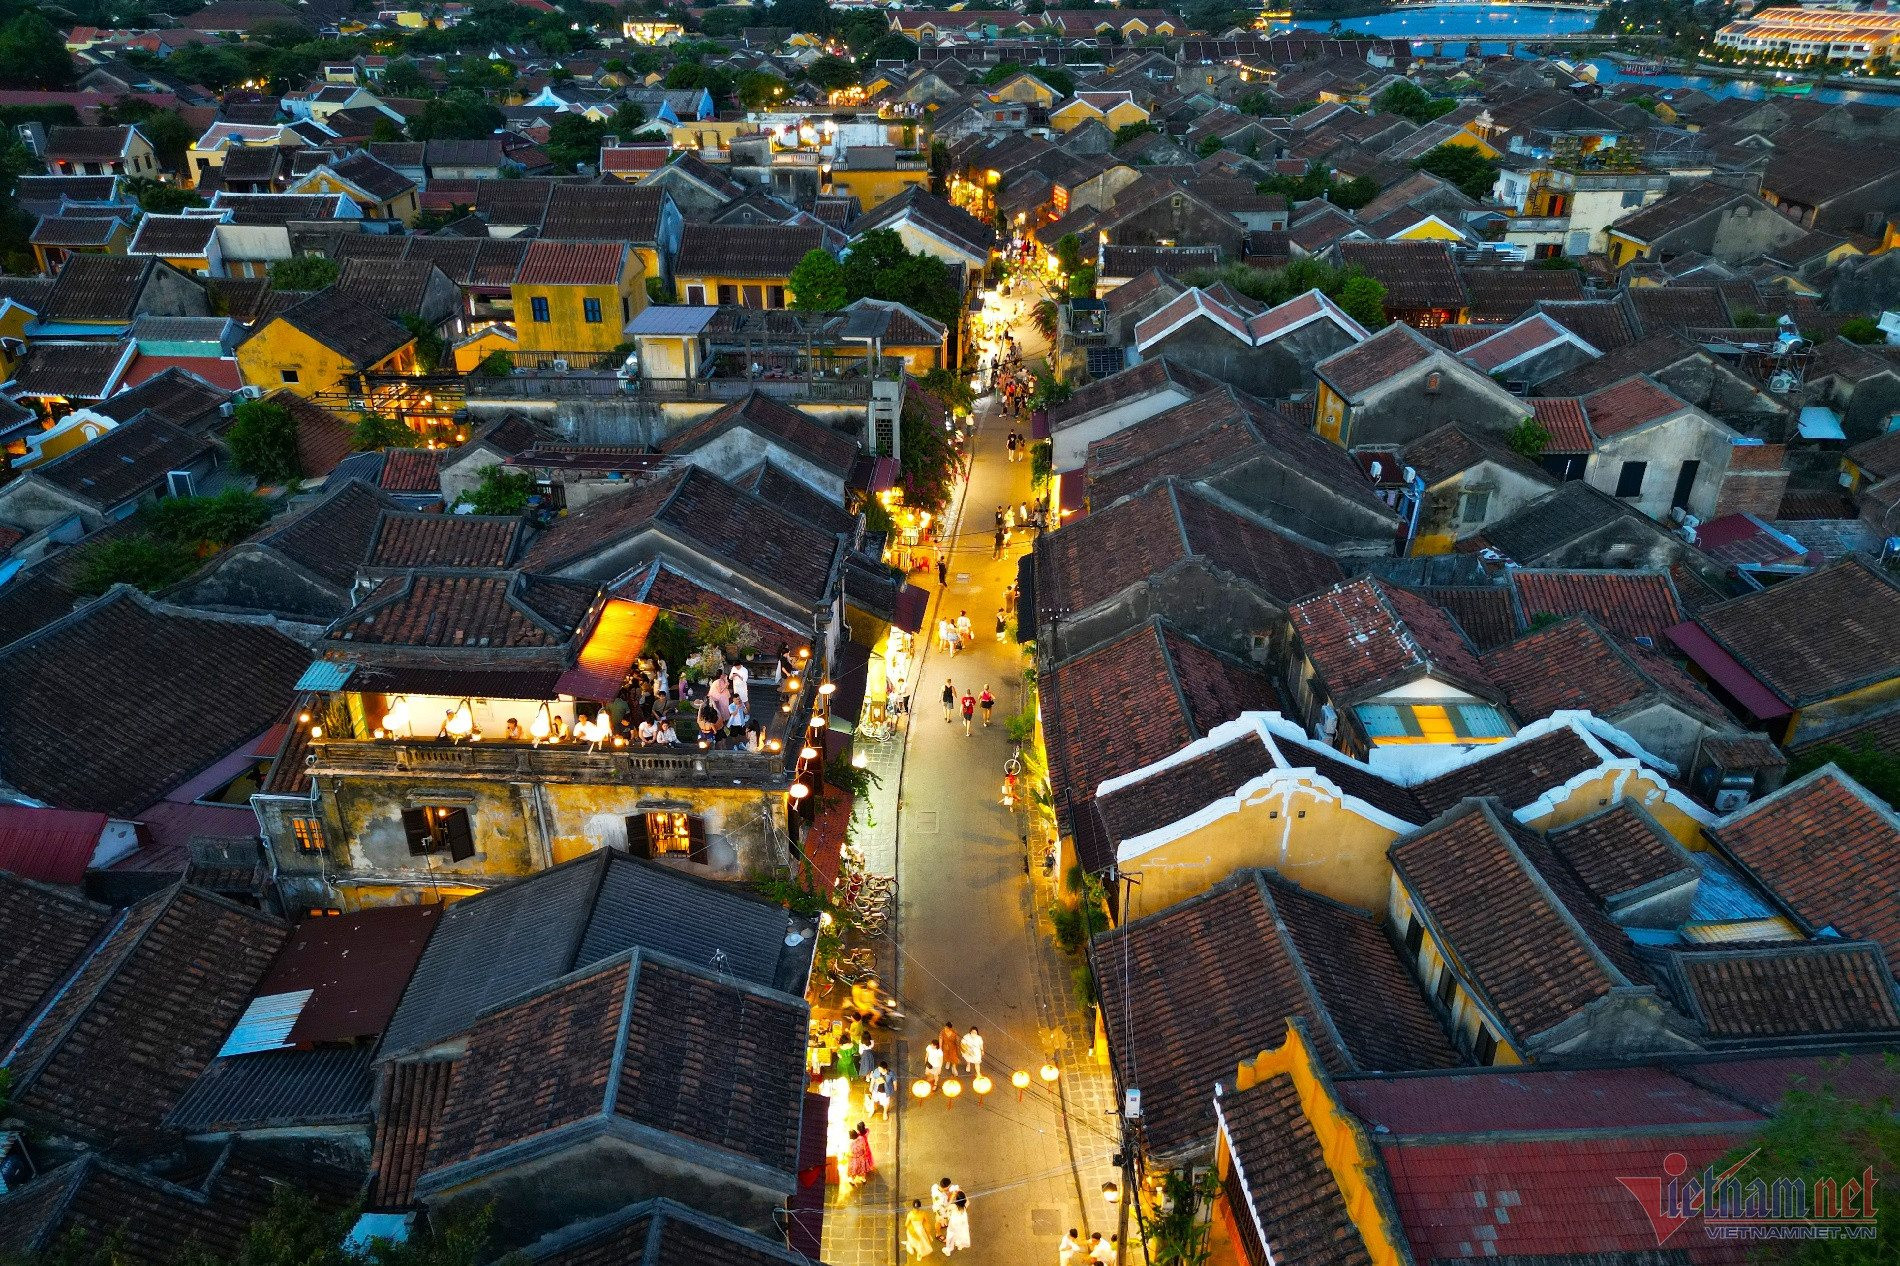 One of the world's most beautiful streets in Hoi An